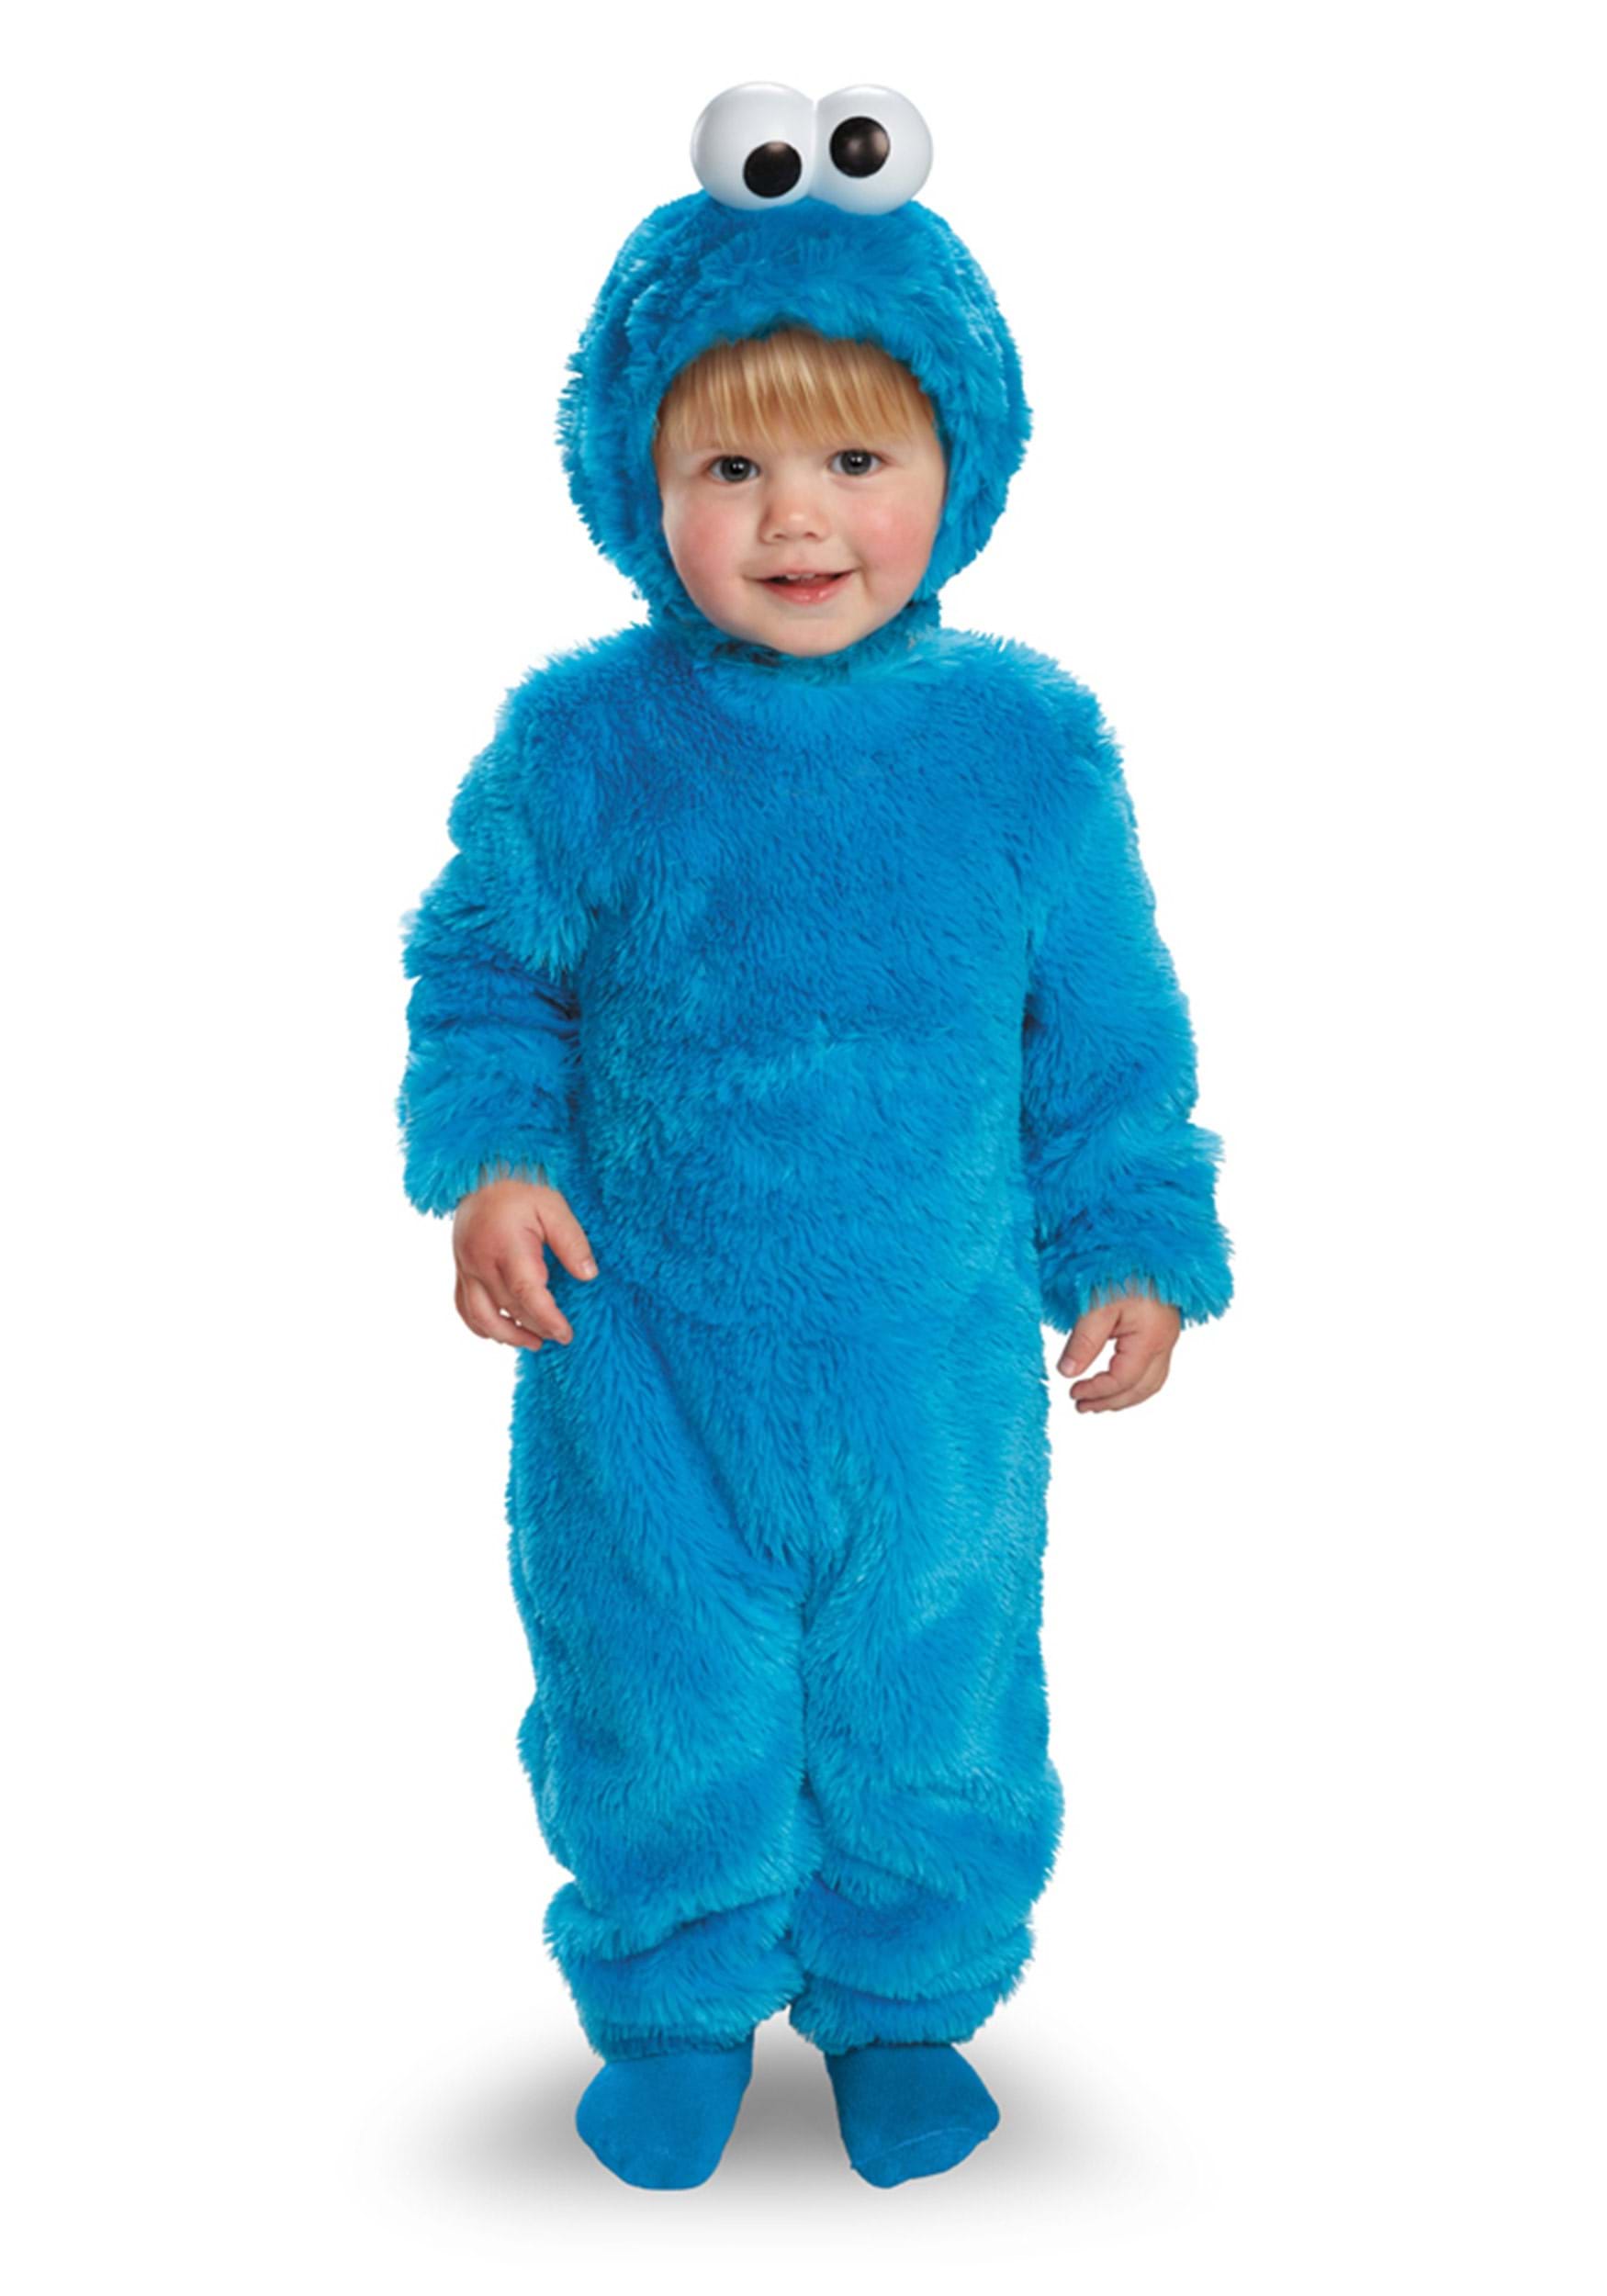 Photos - Fancy Dress Cookie Disguise Toddler  Monster Costume w/ Light-Up Eyes Blue DI55173 